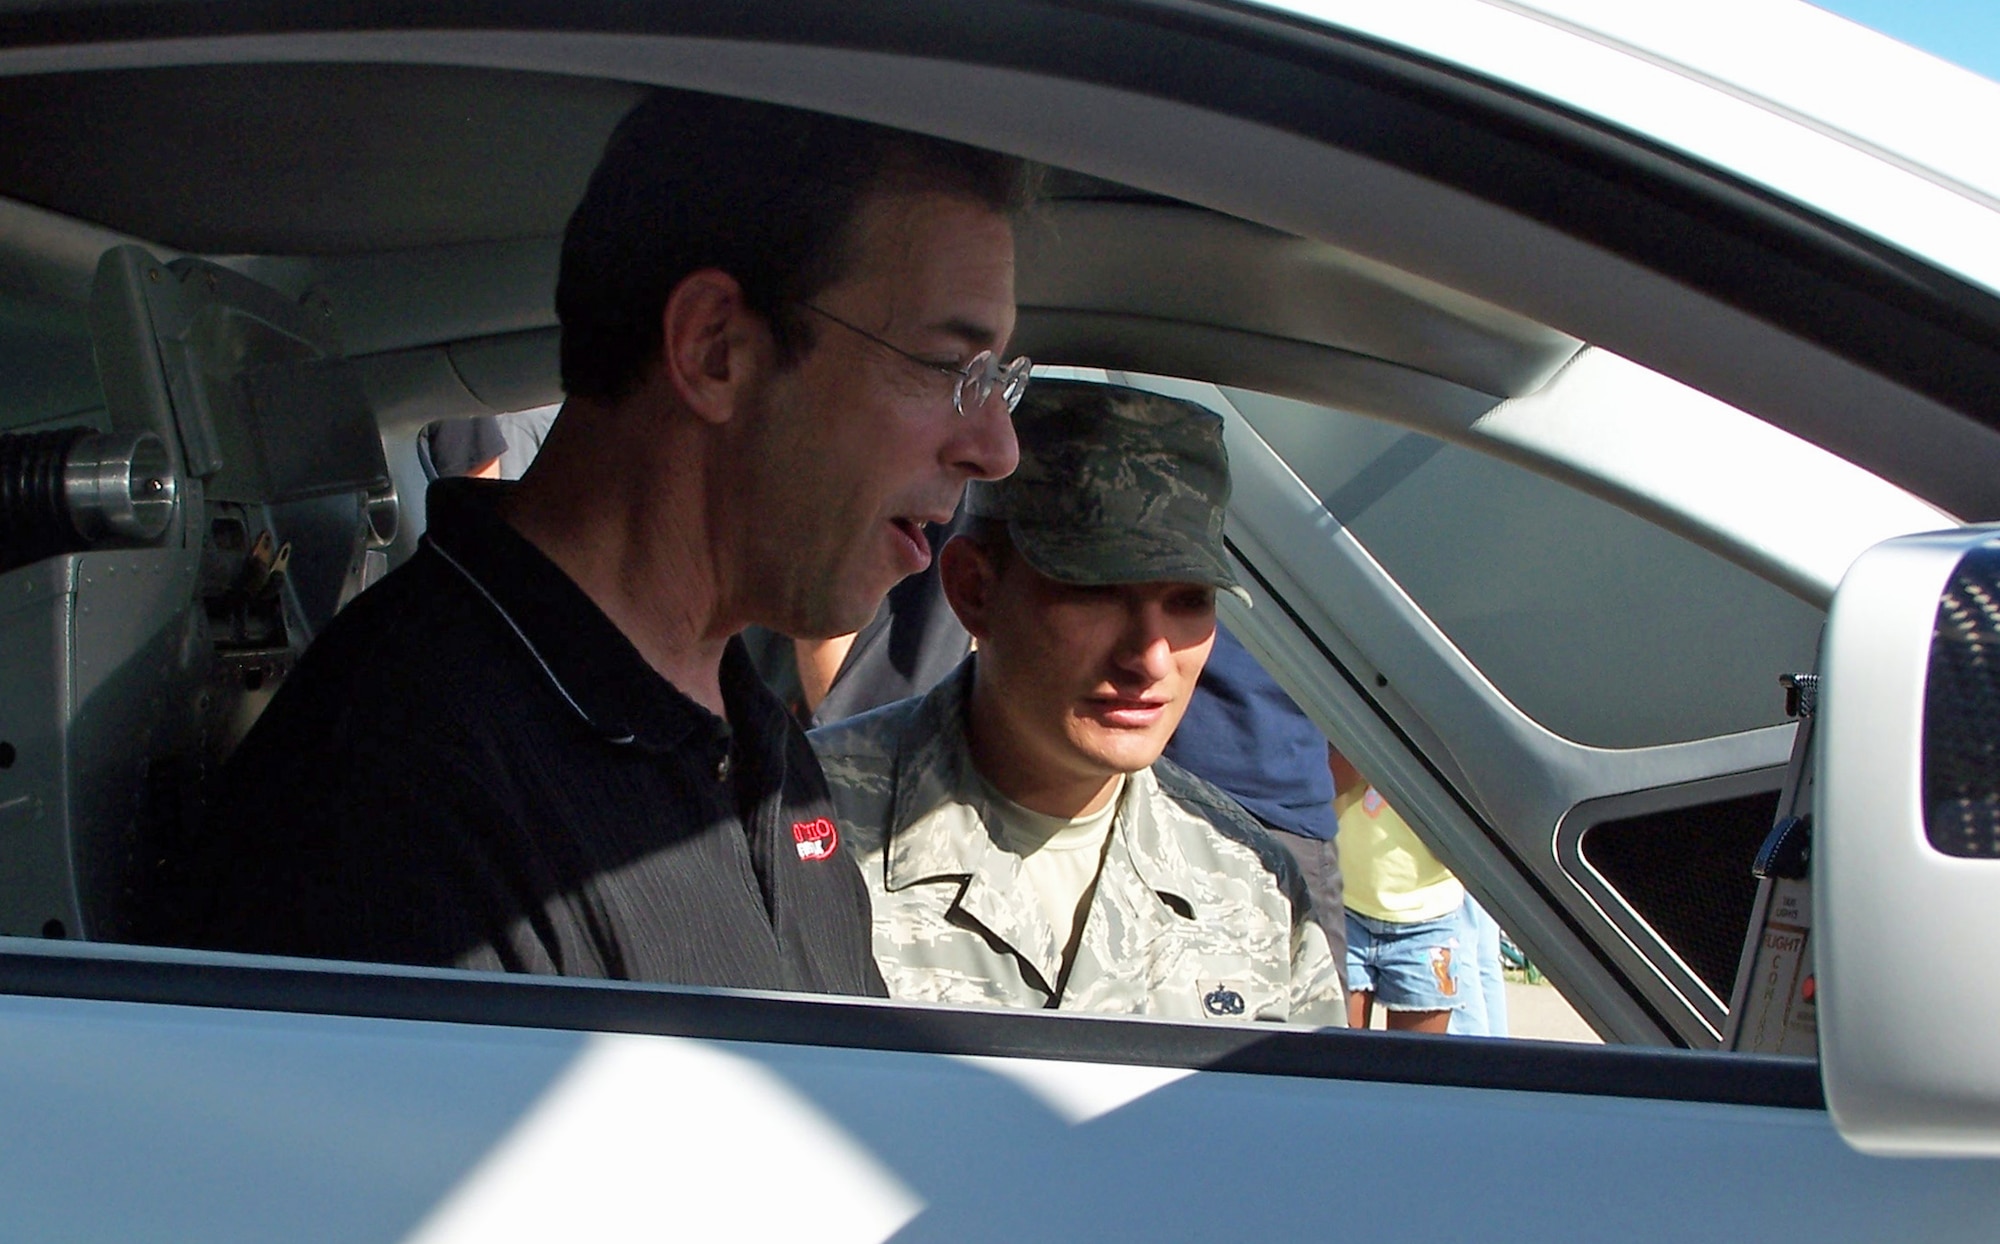 Staff Sgt. Chad Tanner gives syndicated radio personality and consumer advocate Clark Howard a tour of the Air Force 'X-1' Mustang, Sept. 18, 2009 at Wright State University.  The X-1 is a modified Ford Mustang with a jet cockpit that includes a single-driver ejection seat in the center of the vehicle, short shifter, flight stick and advanced instrumentation panel. The car was in town to support recruiting efforts during the U.S. Air Force Marathon.  Howard ran the marathon's 5K race and met with Airmen and their families, answering questions about personal finance and today's economy. Tanner is with the 338th Recruiting Squadron at Wright-Patterson Air Force Base. (Air Force photo/Ted Theopolos)